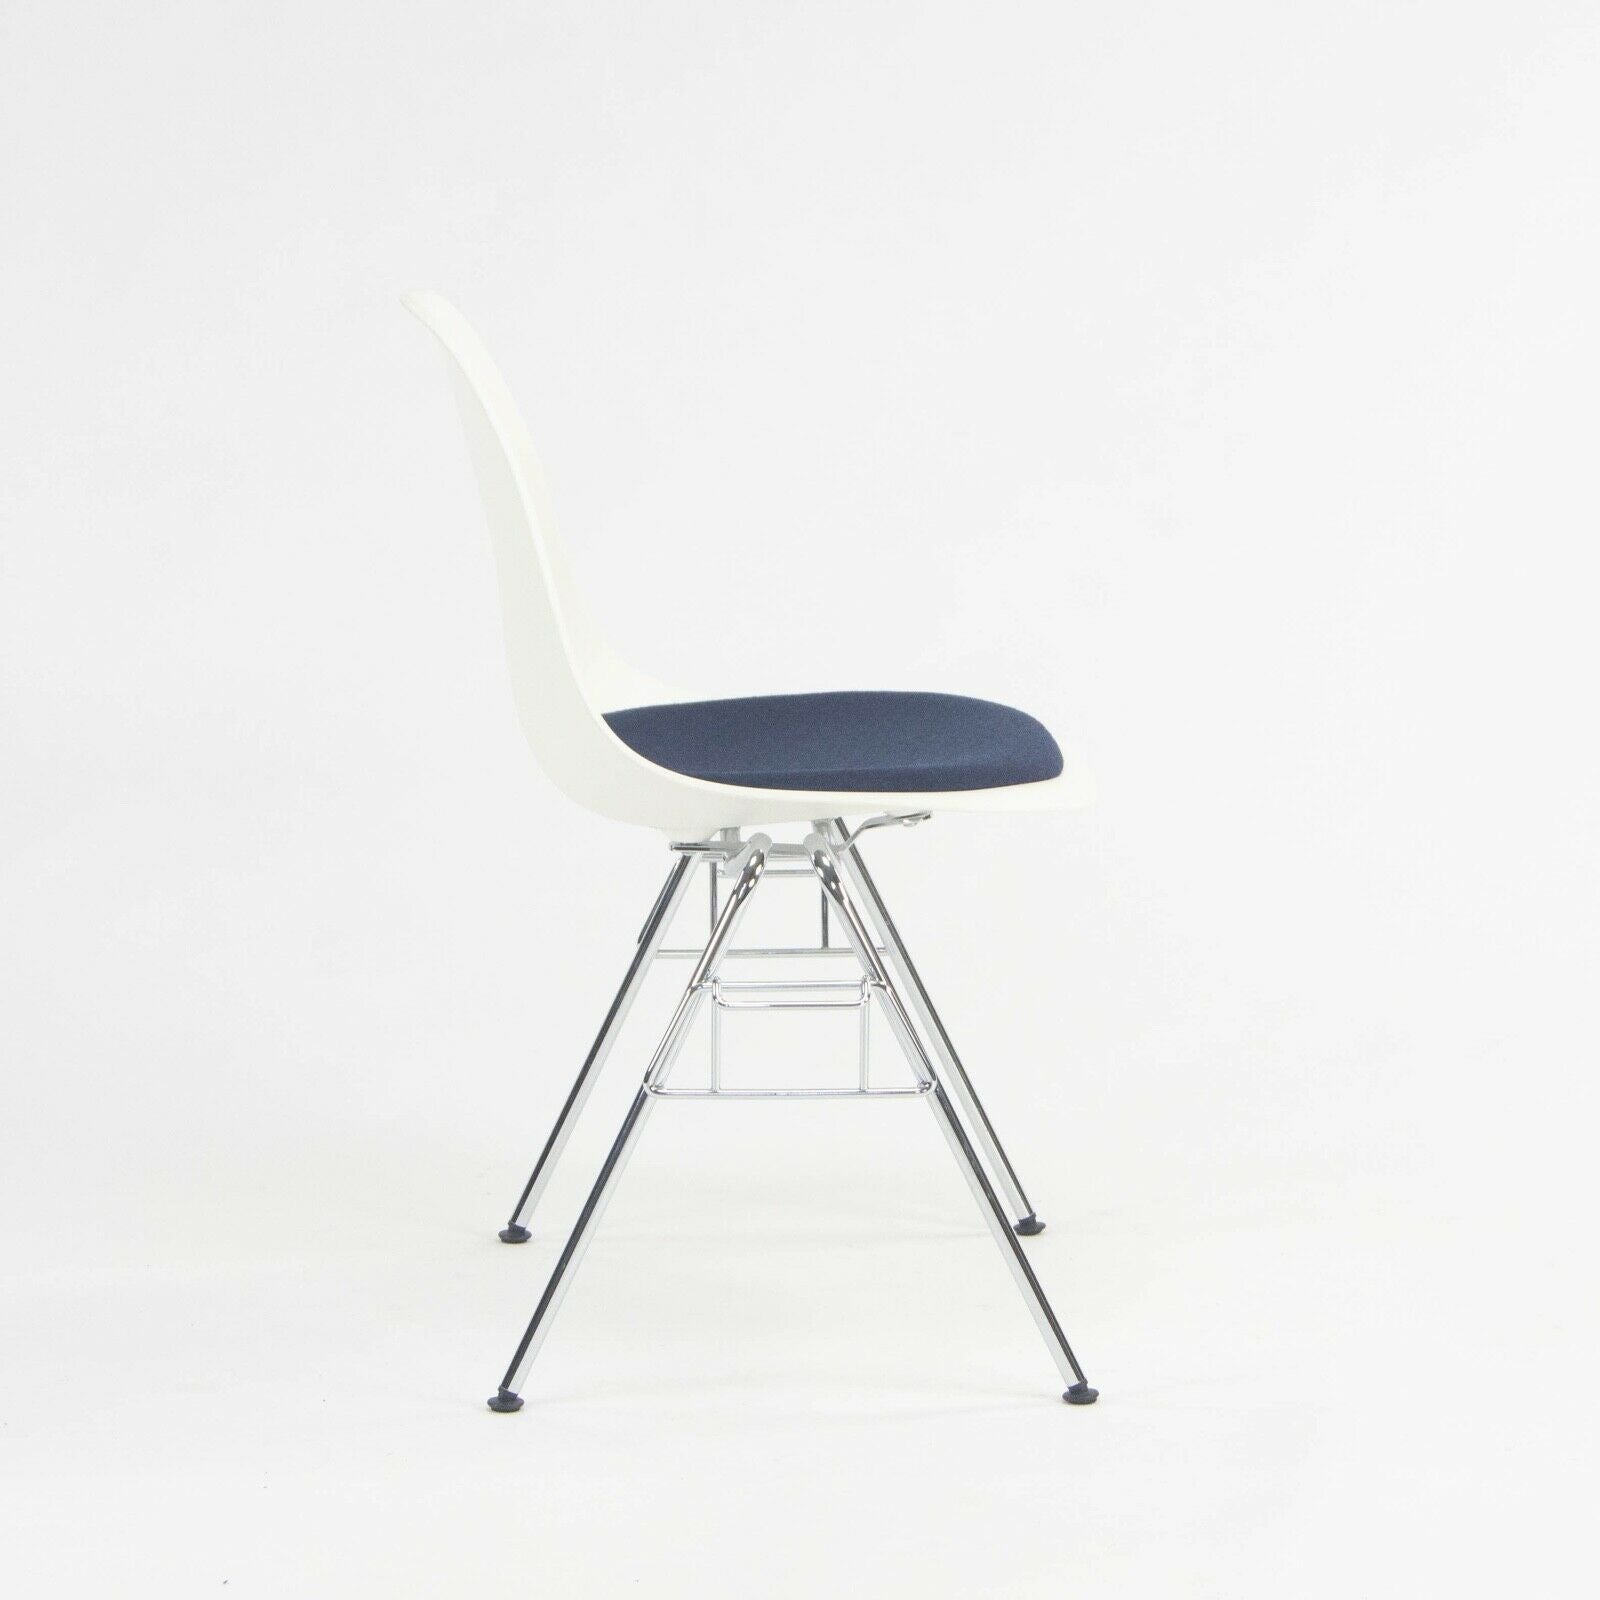 SOLD 2018 Eames Stacking Dining Chair DSS with Navy Seat by Vitra / Herman Miller